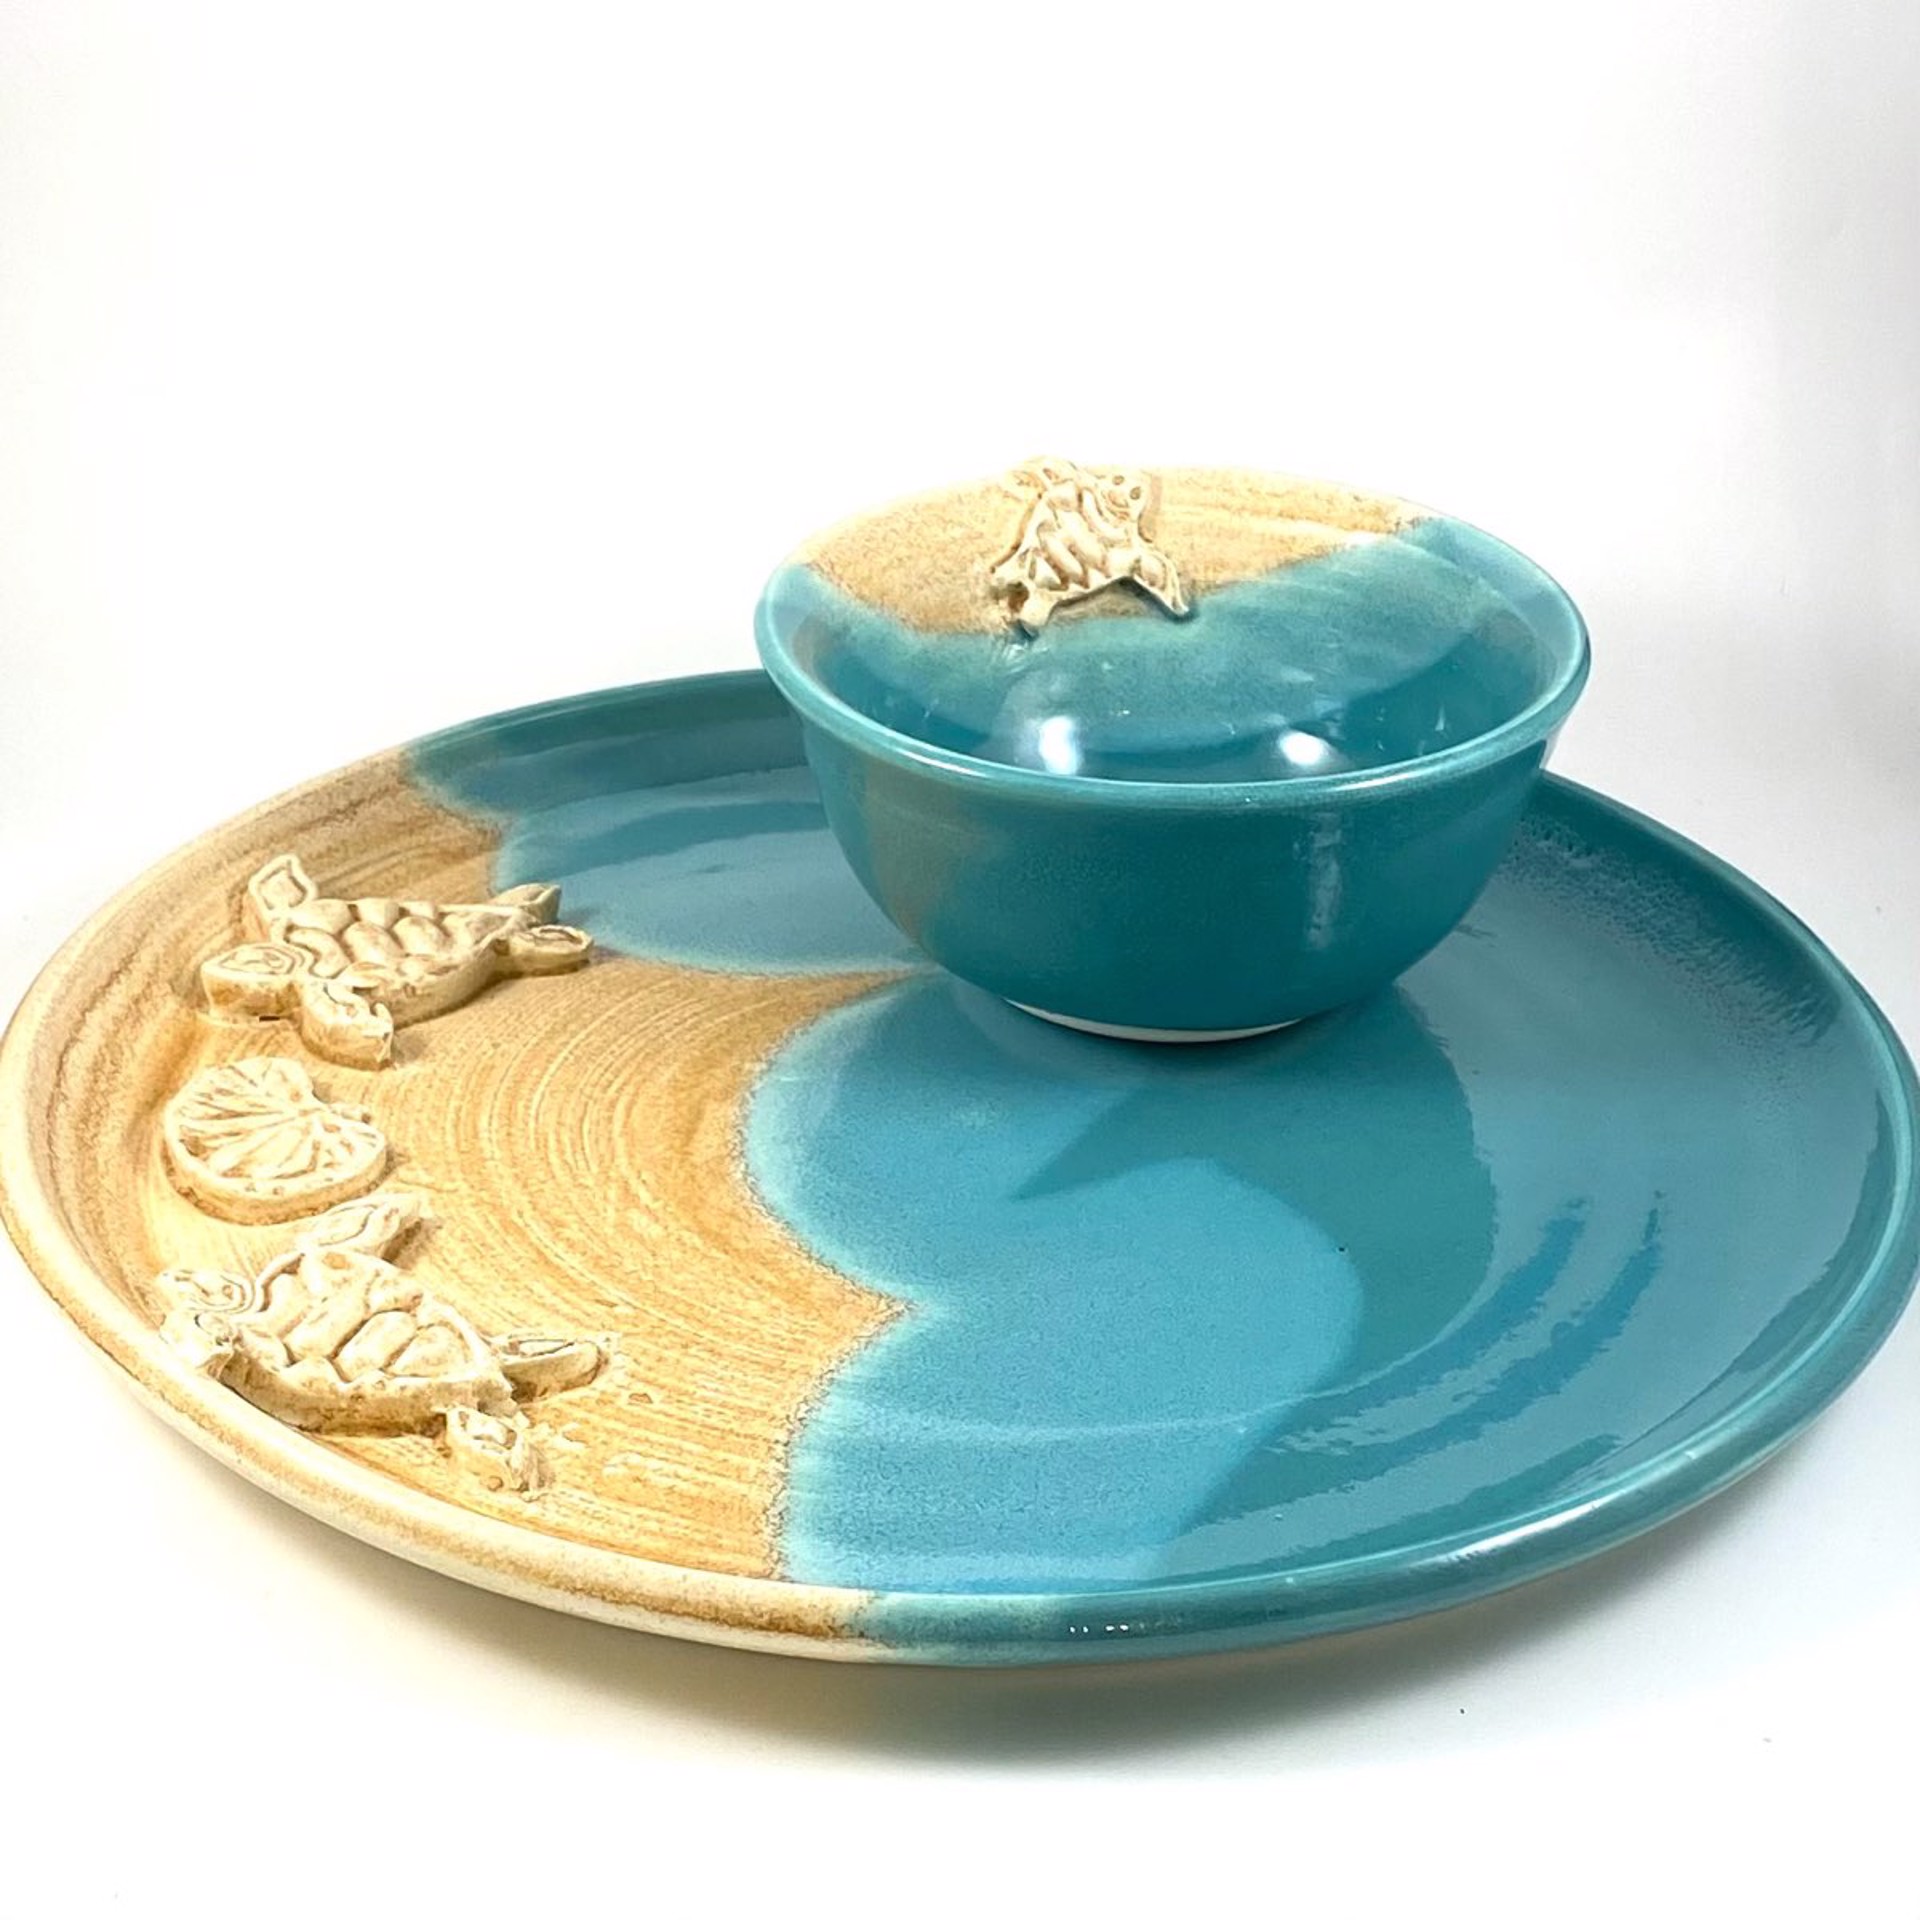 ILO22 Serving Platter with Turtles and Small Bowl Set by Ilene Olanoff